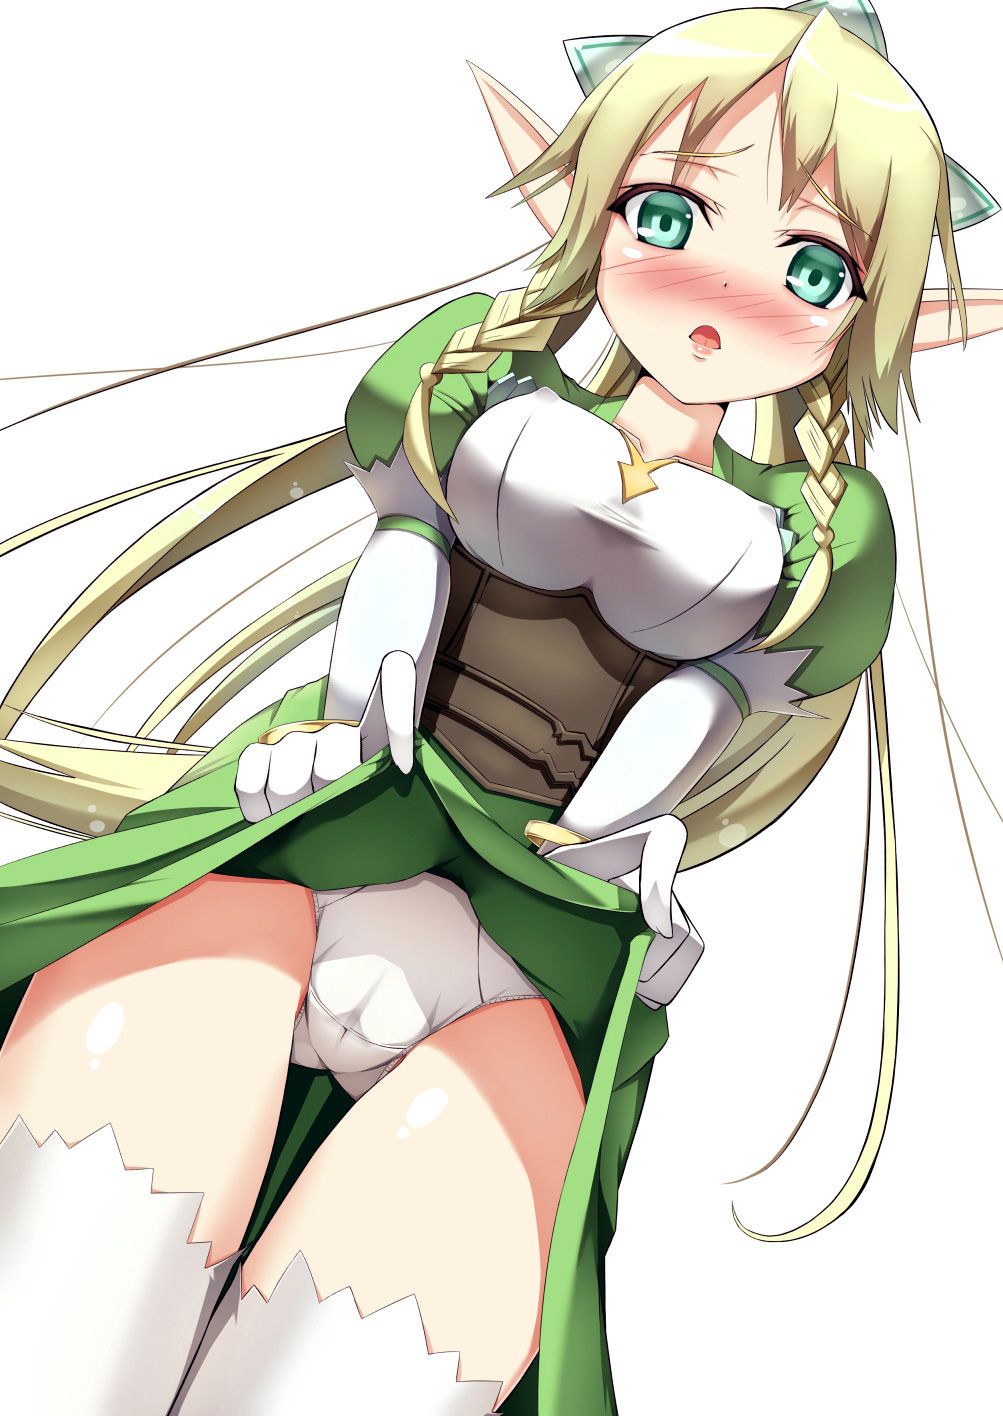 Leafa's Marshmallow big tits and boobs tits online lick with how ww. Sheets挟ndara Dick only worn in disagreeable leafa so cum and I tits together... sword online 13